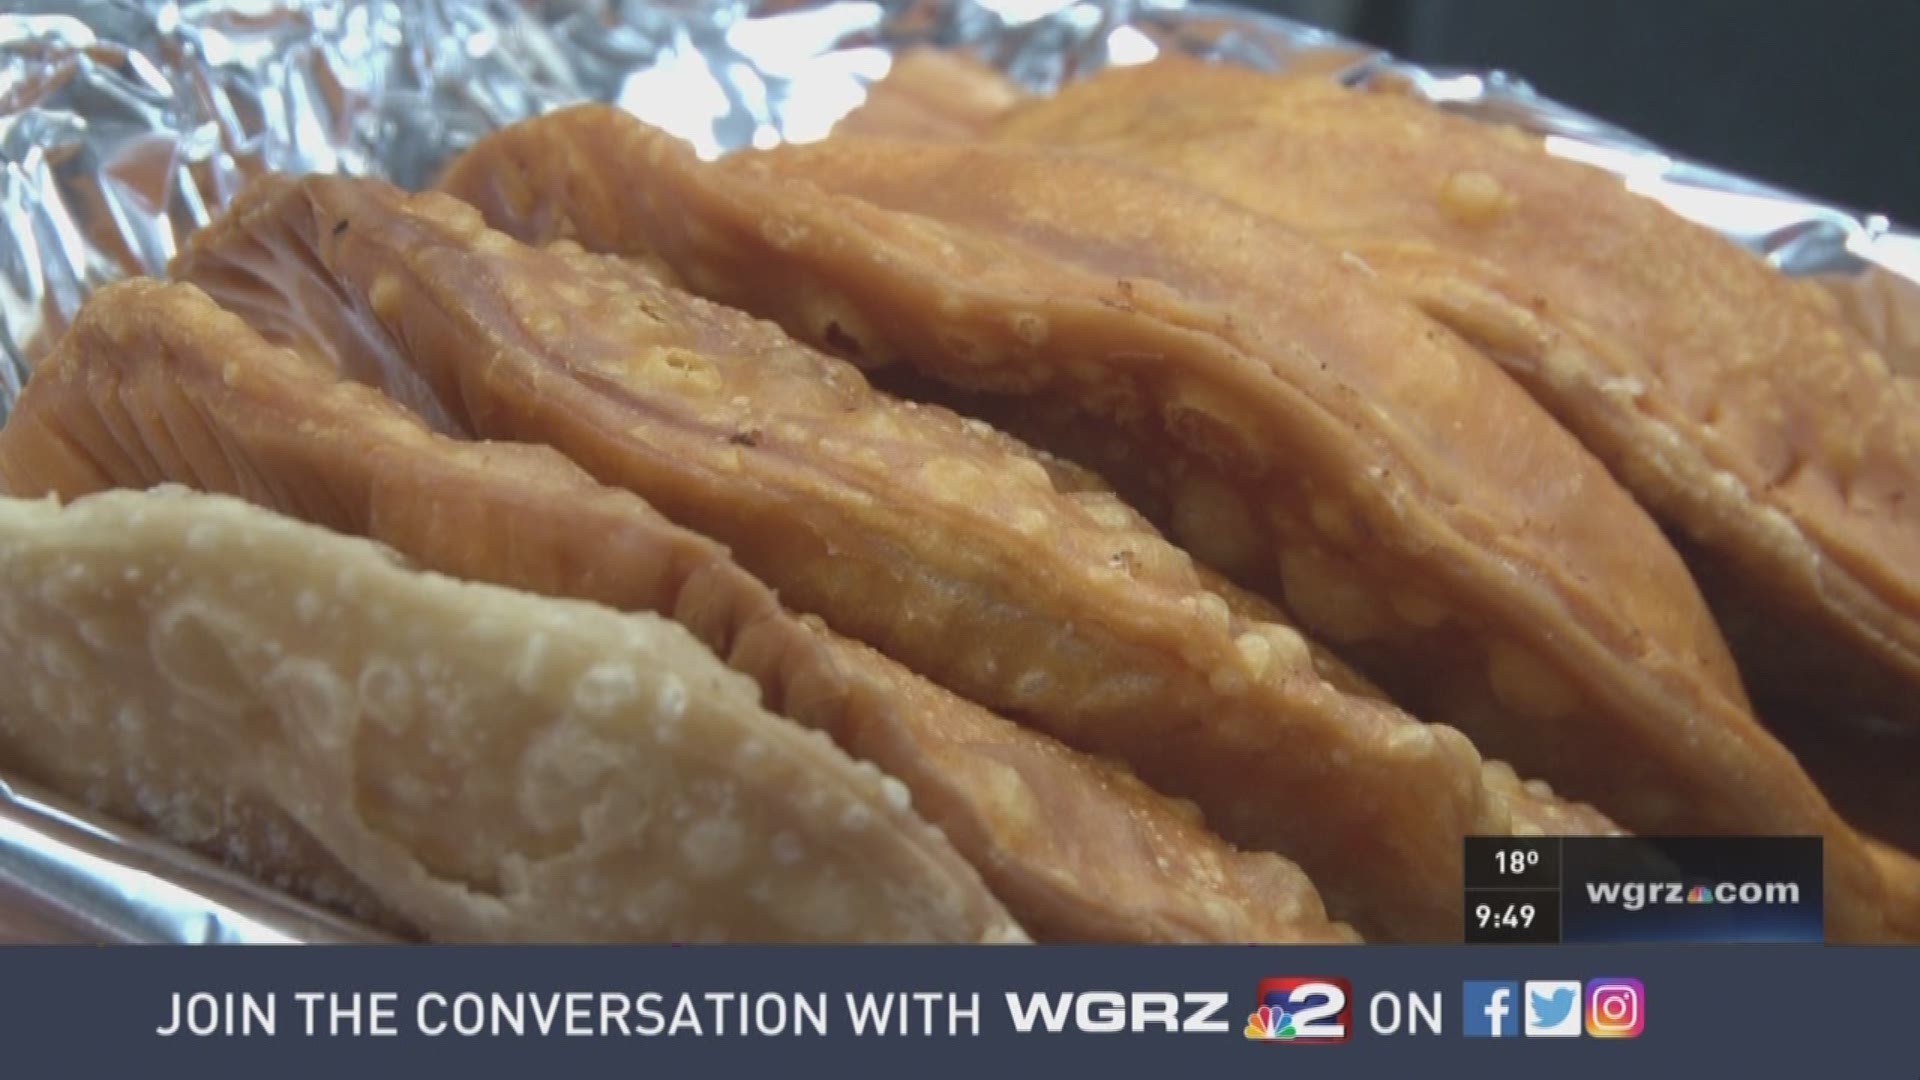 Channel 2 viewers never disappoint with their suggestions for Unique Eats spots.  This week Zachary Kineke went to a Puerto Rican bodega - Montes Grocery on Swan Street.